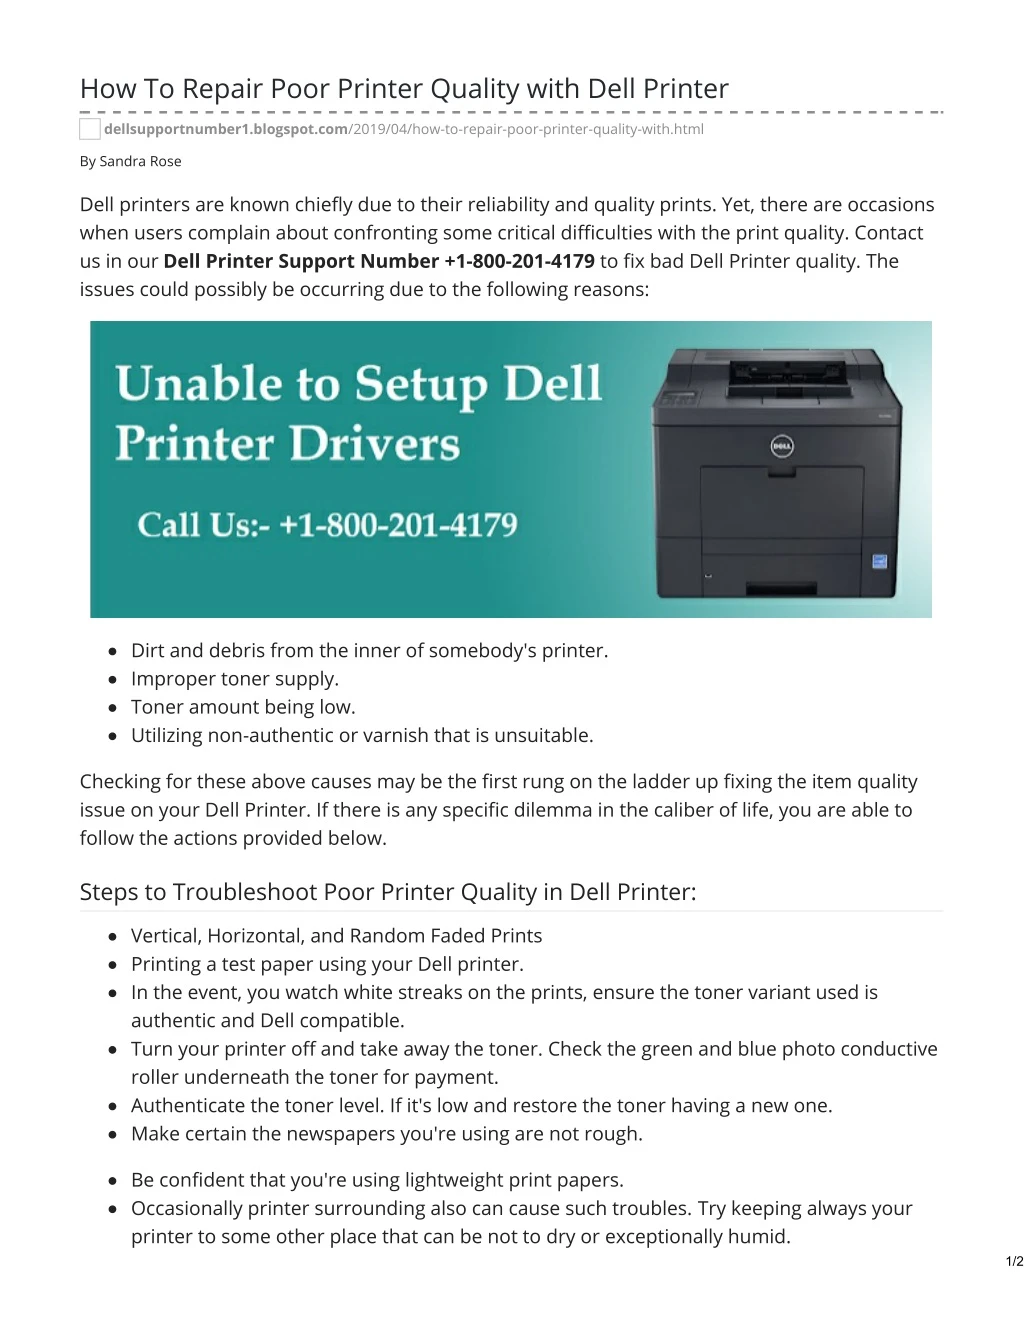 how to repair poor printer quality with dell